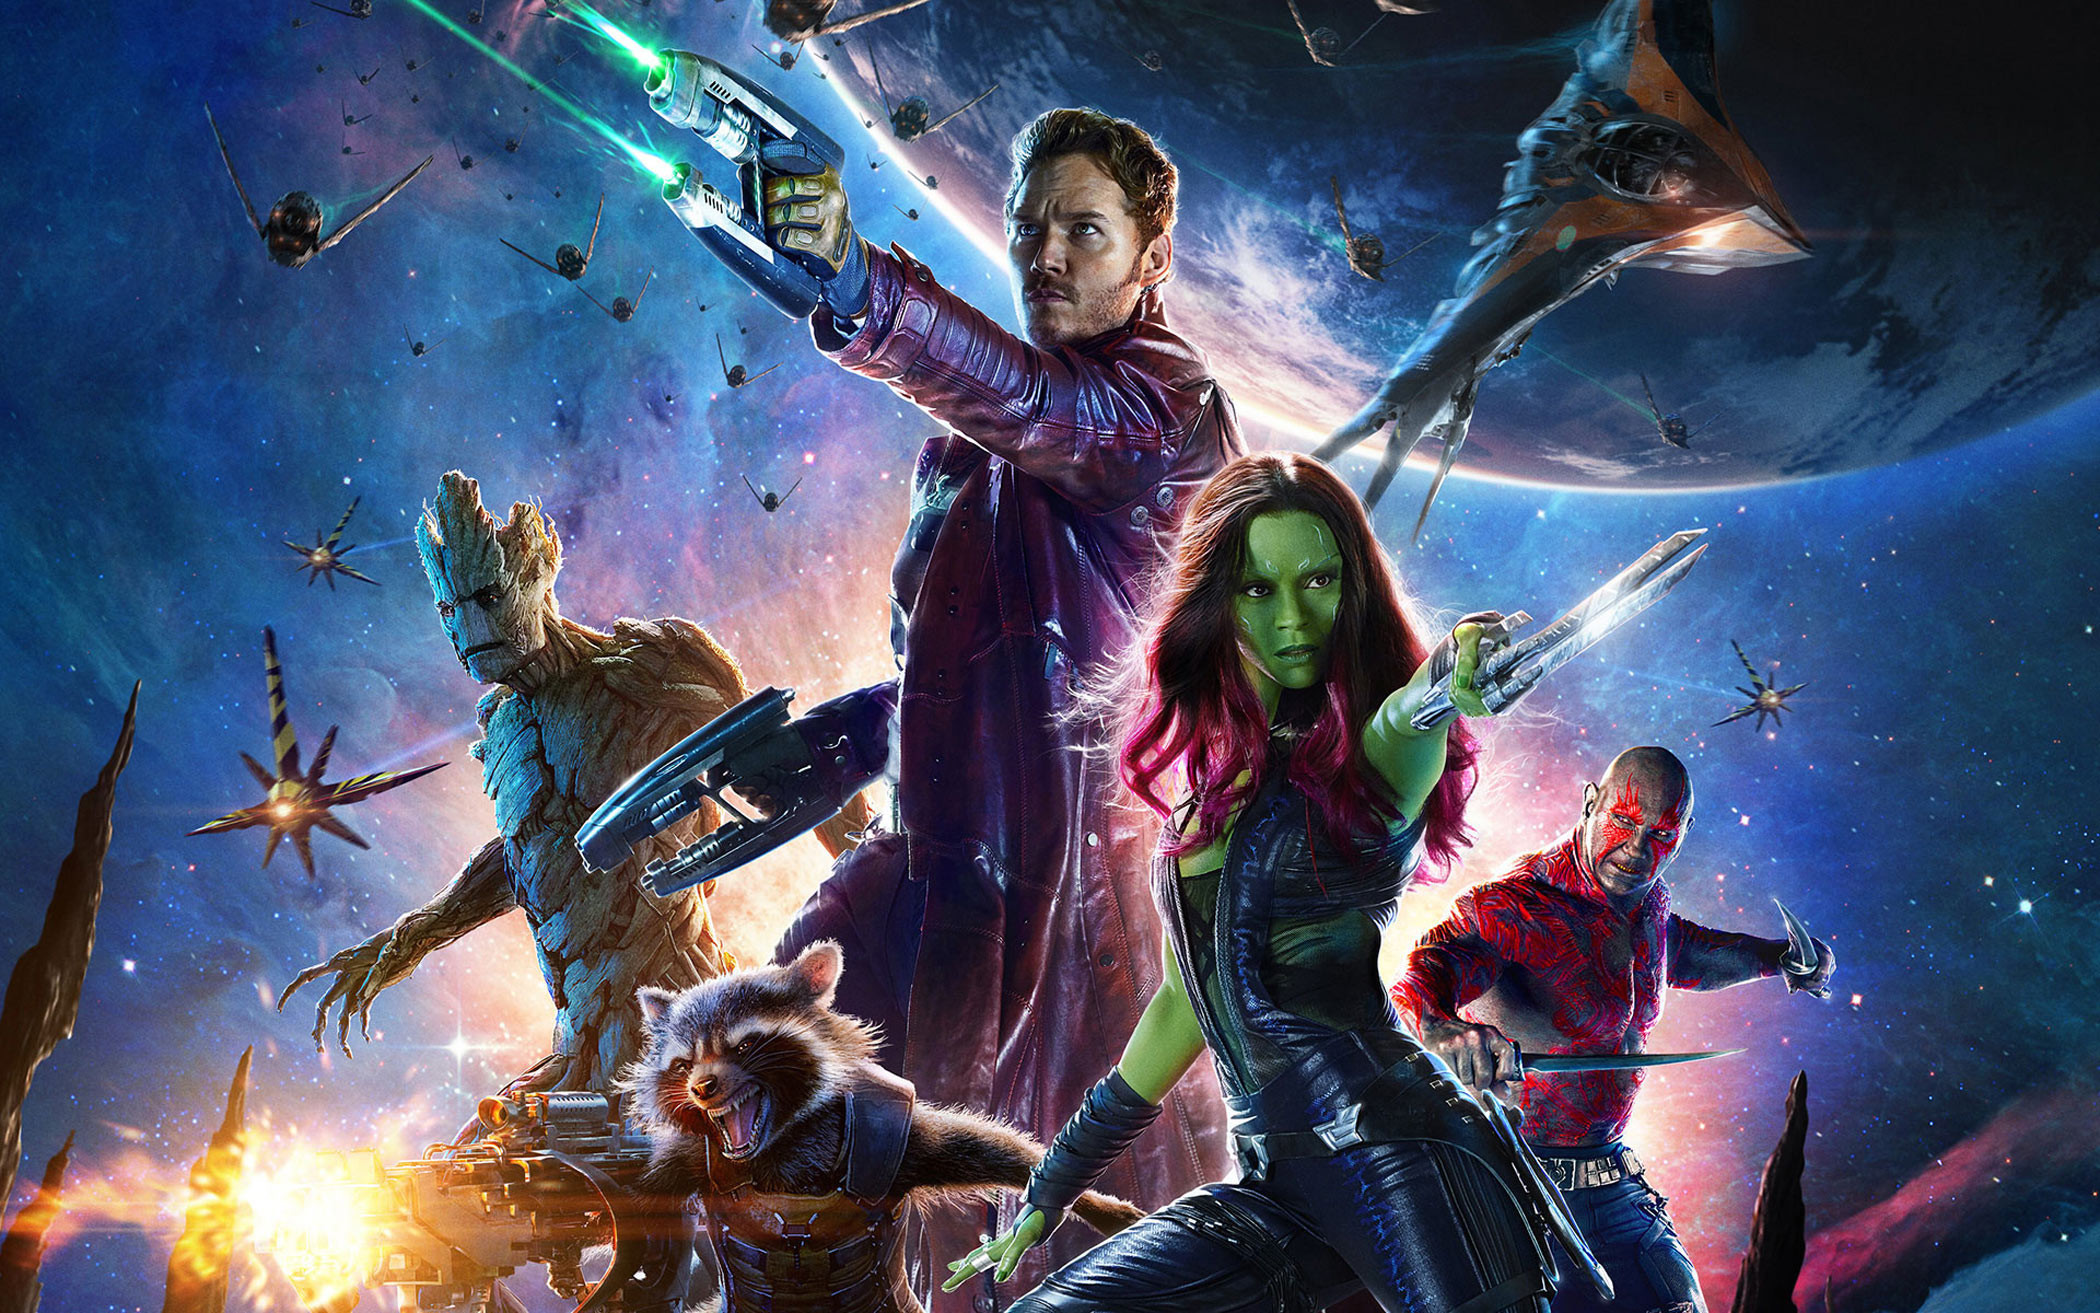 Guardians of the Galaxy awesome mix vol.1 -01. Blue Swede - Hooked on a Feeling